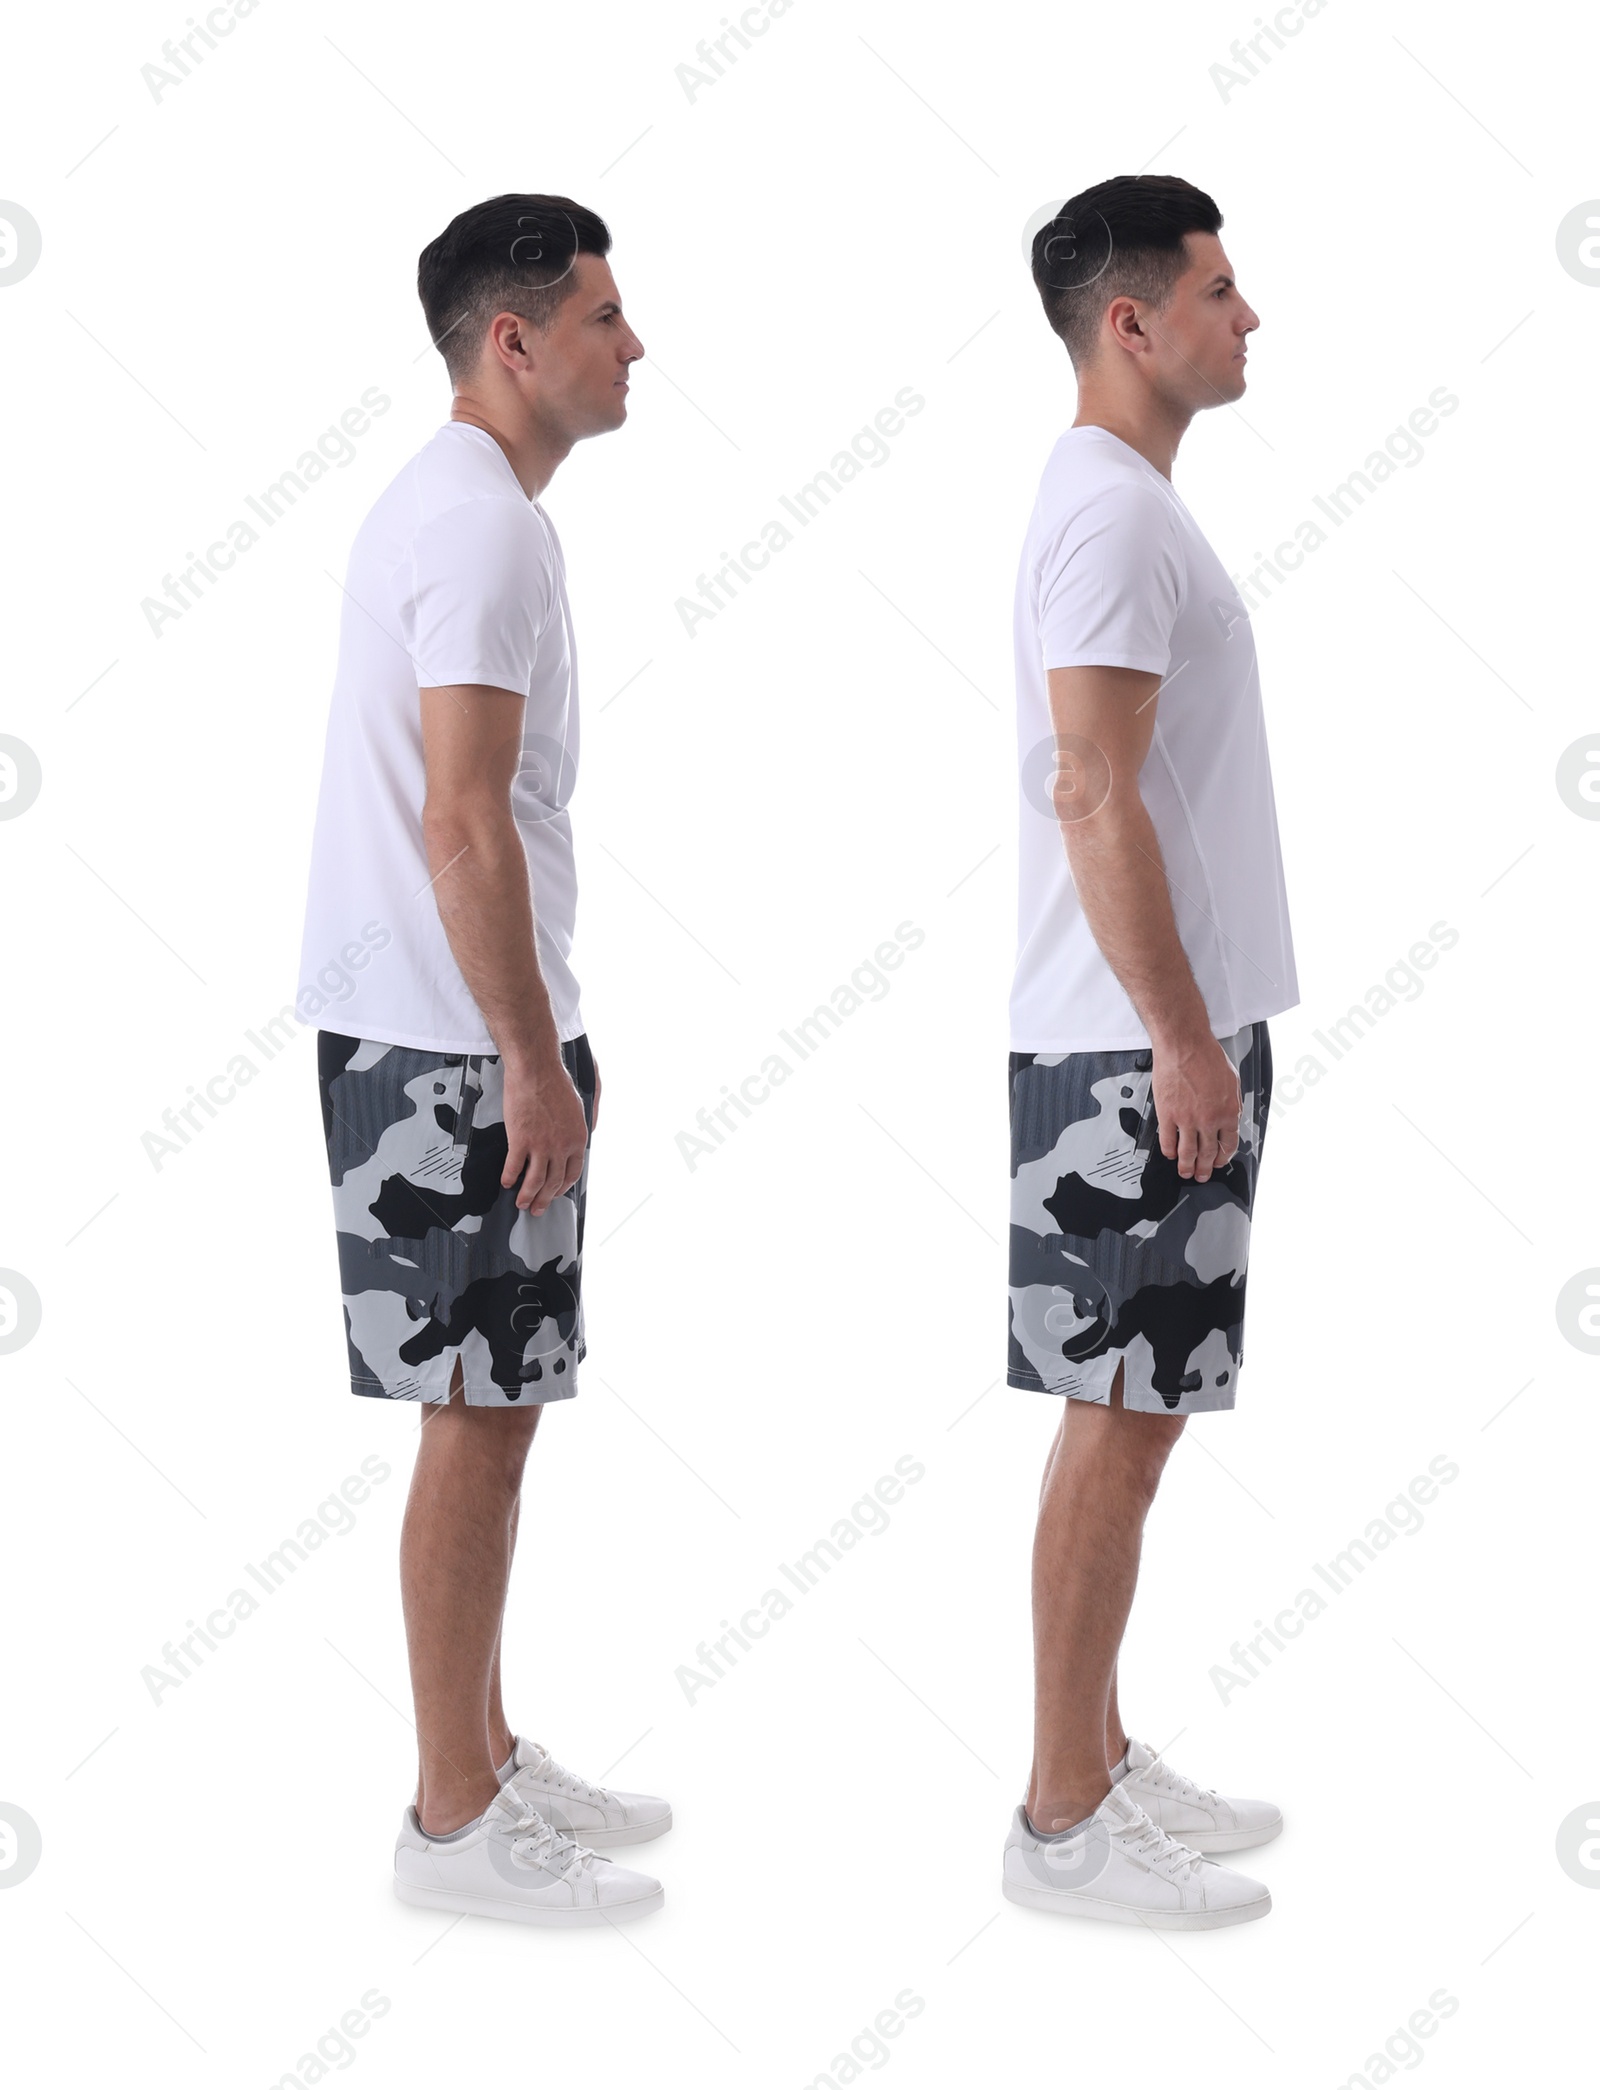 Image of Collage with photos of man with poor and good posture on white background